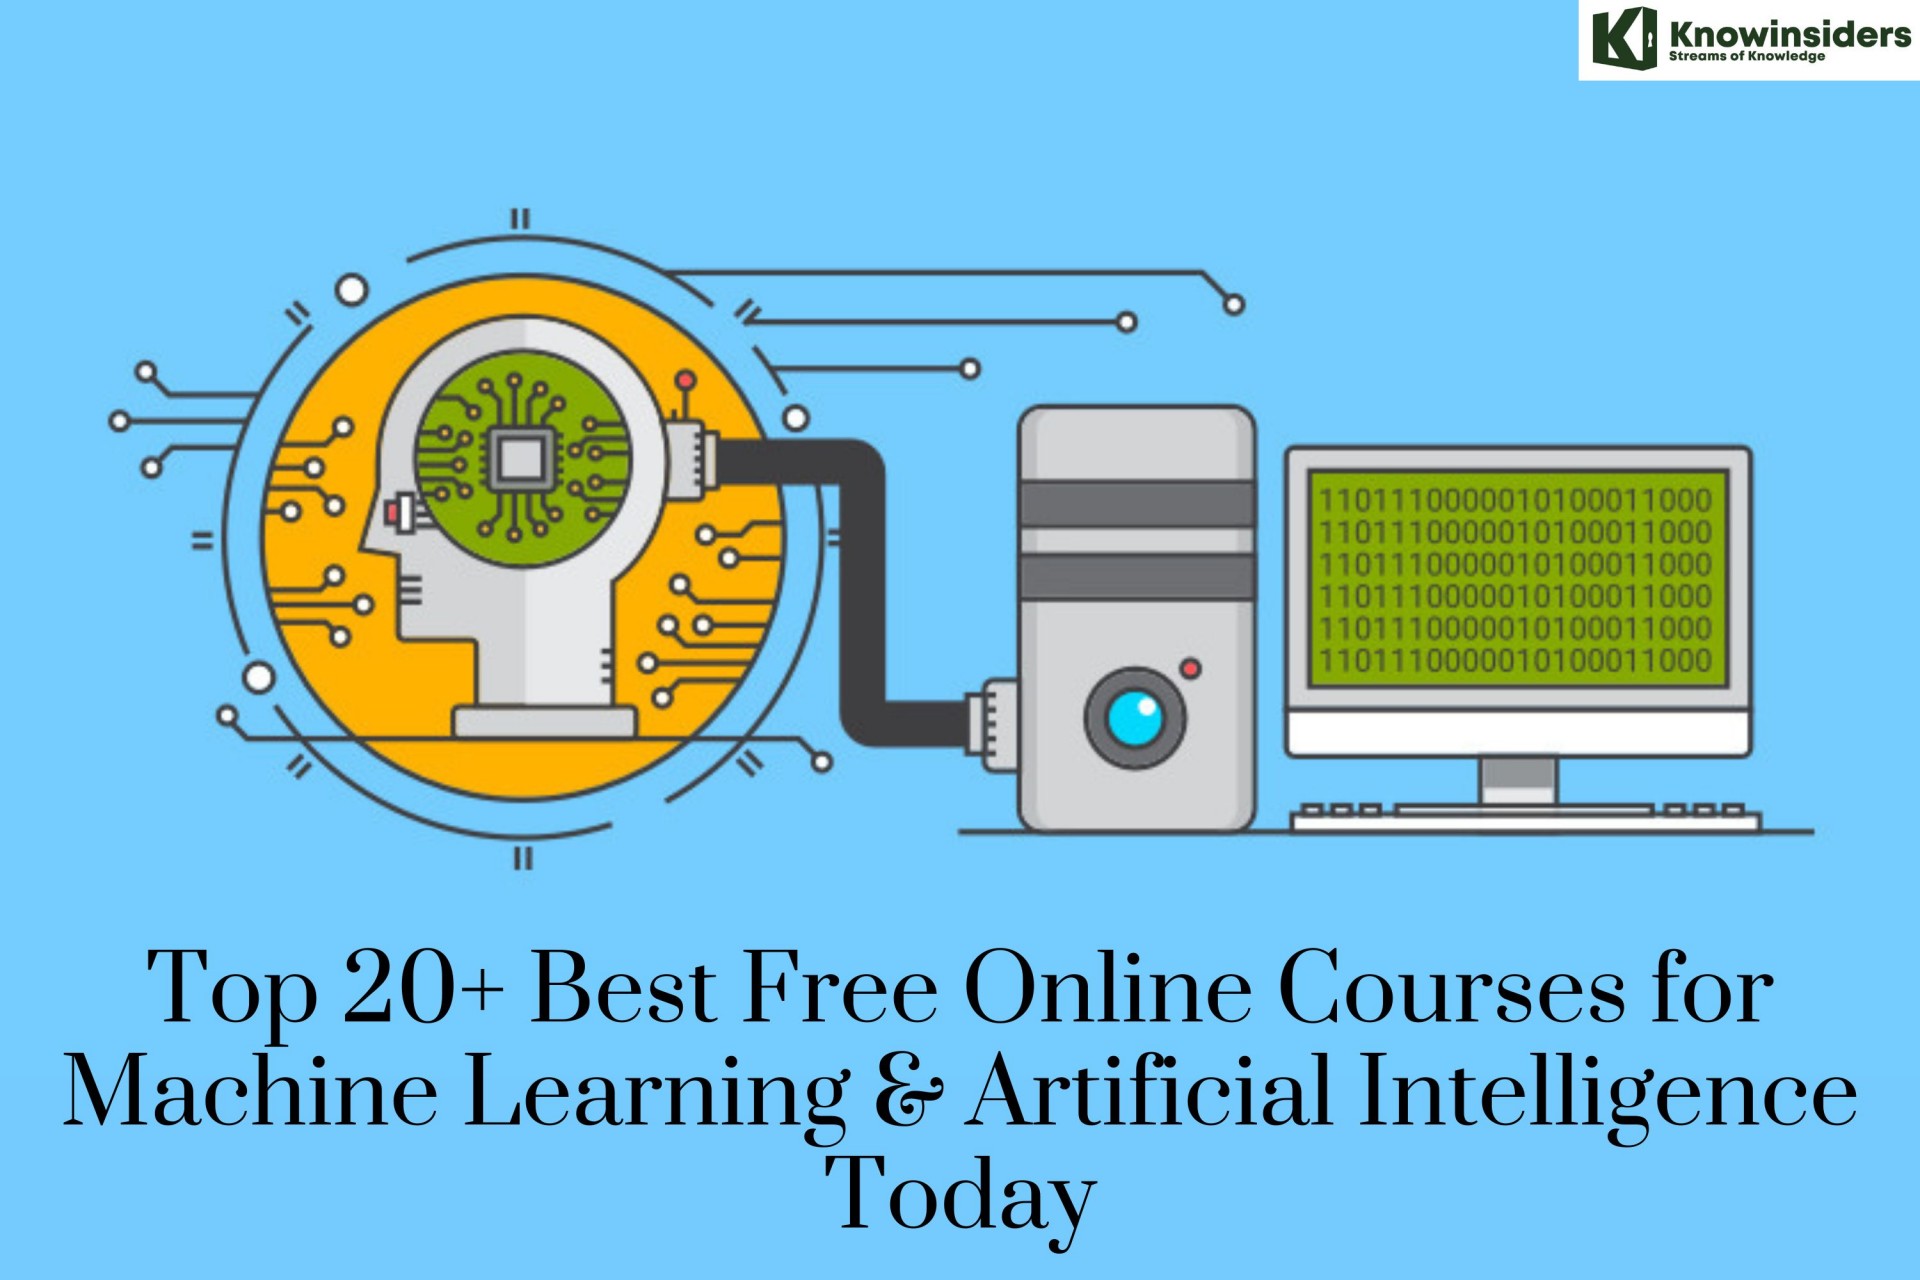 Top 20+ Best Free Online Courses for Machine Learning & Artificial Intelligence Today